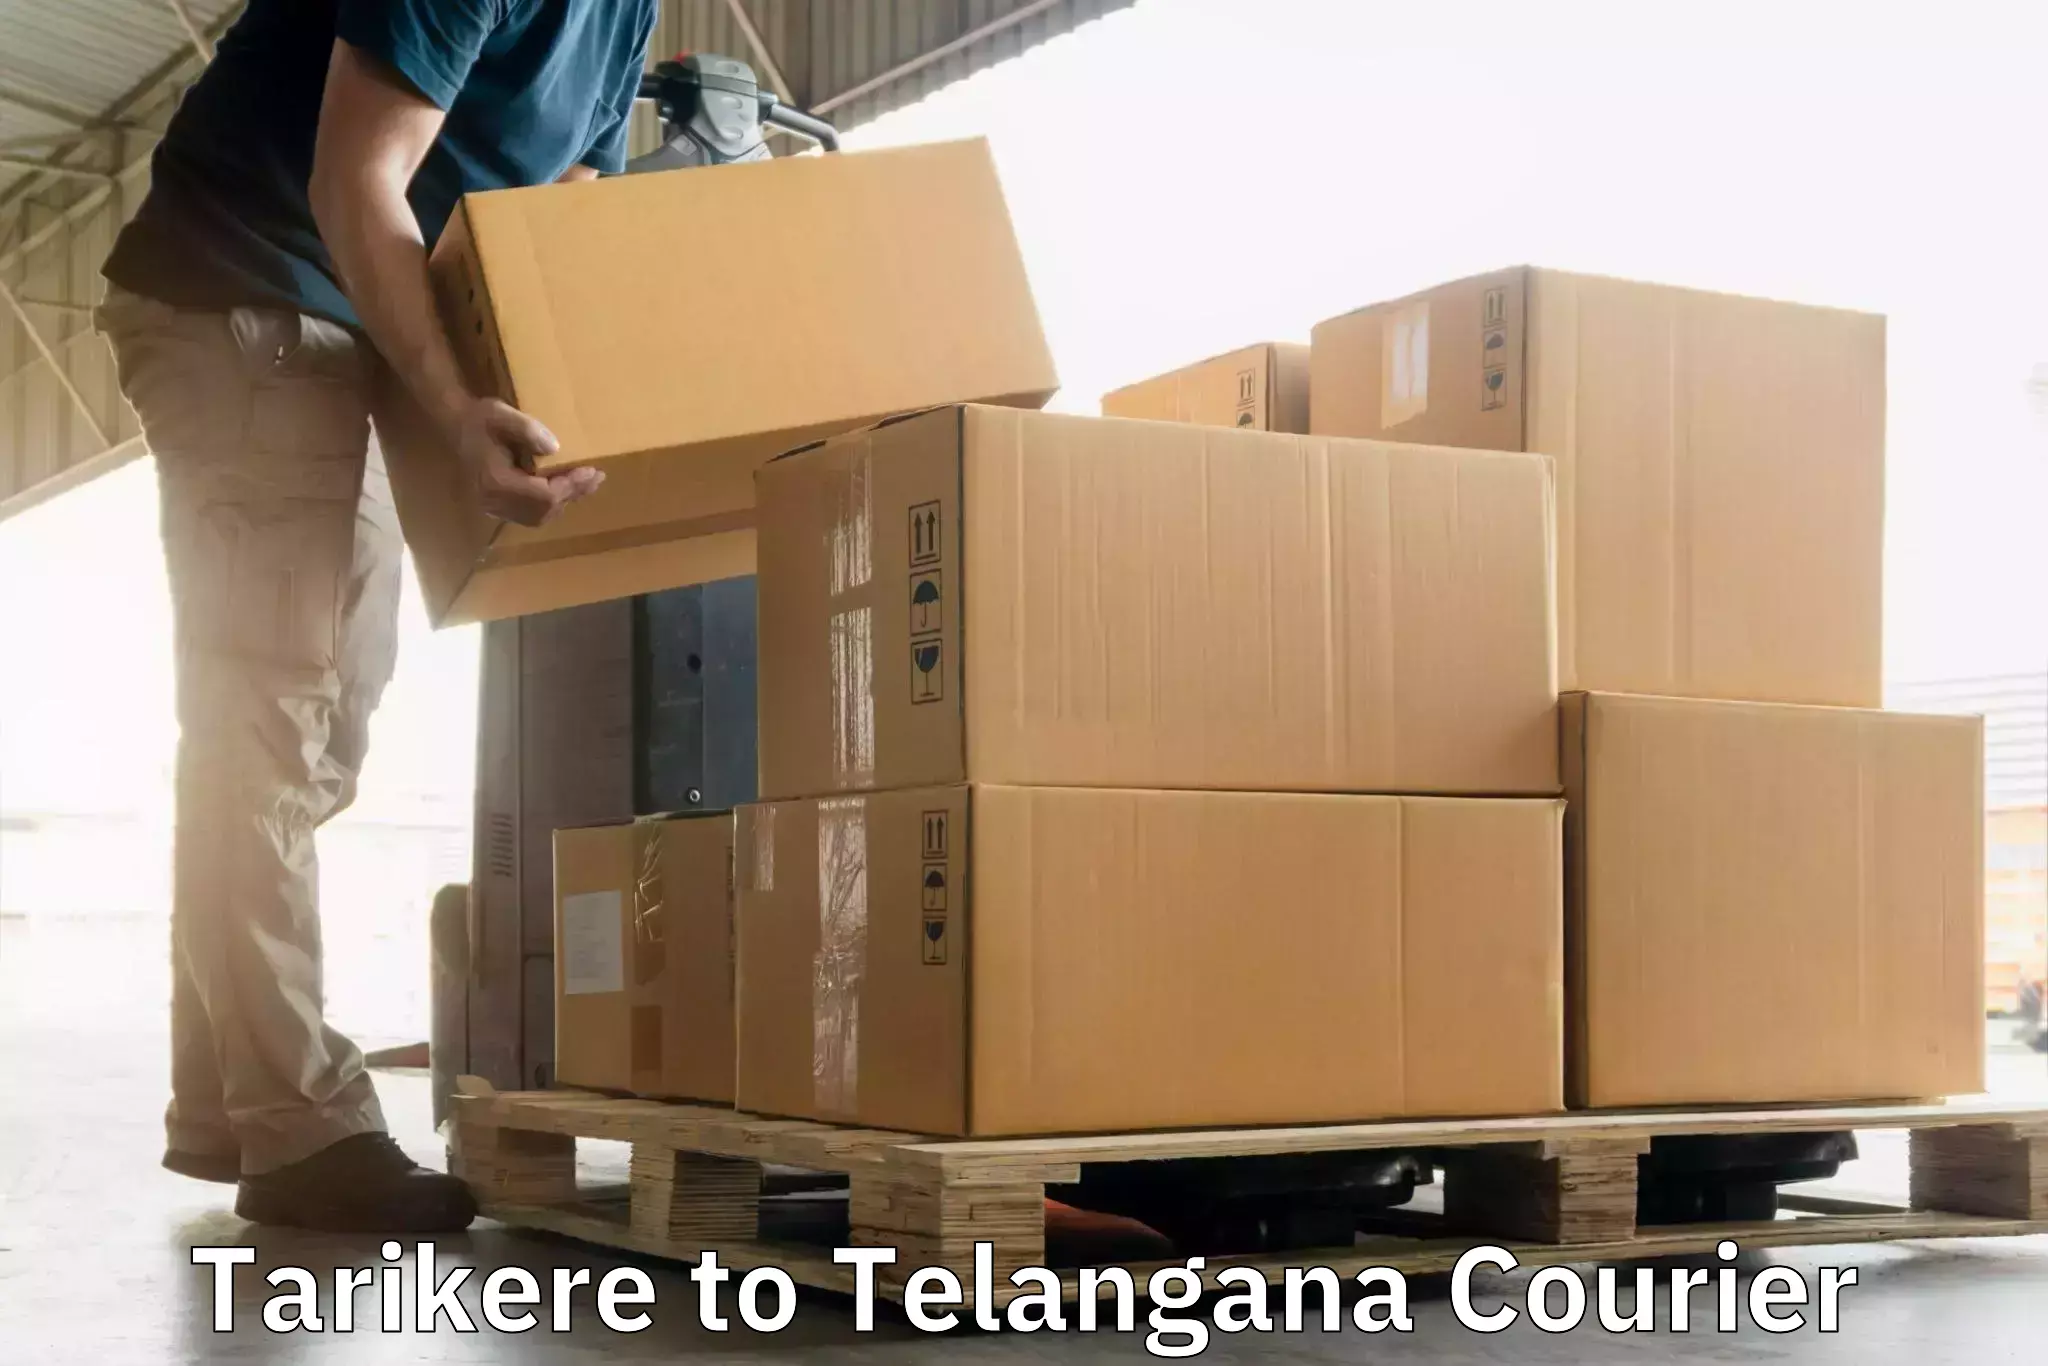 Fast parcel dispatch in Tarikere to Hyderabad